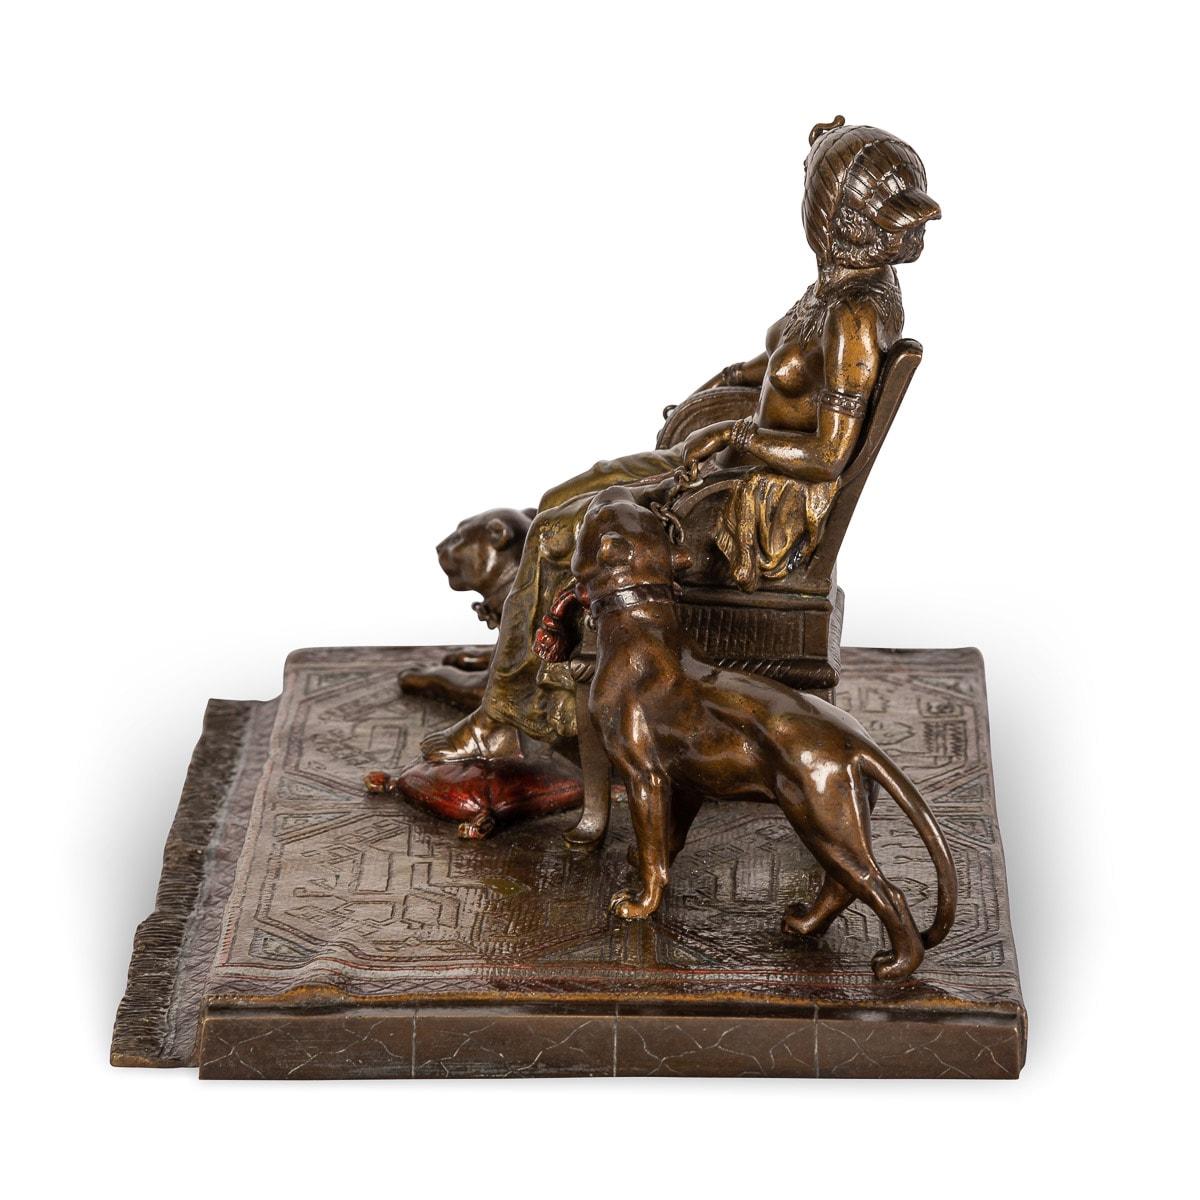 Antique early 20th century Austrian cold painted bronze of seated queen Cleopatra with two Pumas by her side, on a realistically modelled carpet, draped over a rectangular base. Made by Franz Xavier Bergman (1861-1936), arguably, the most famous of